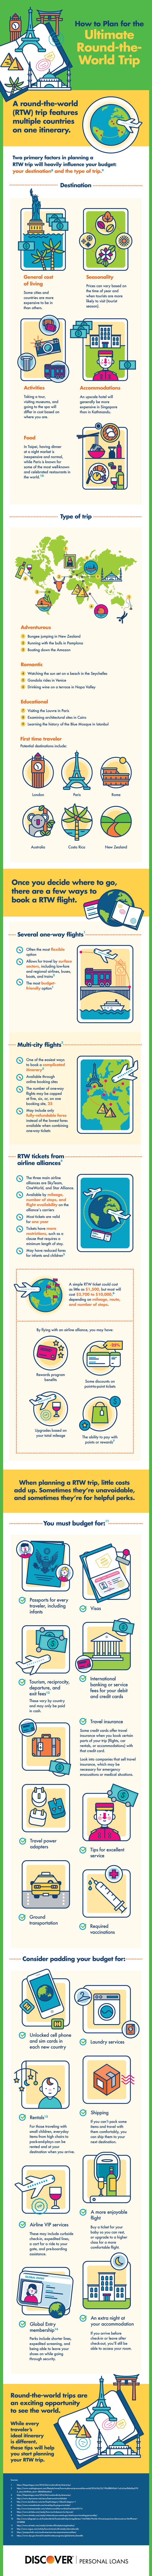 Dreaming of a Round-the-World Trip? Here’s Your Ultimate Planning Guide - Infographic